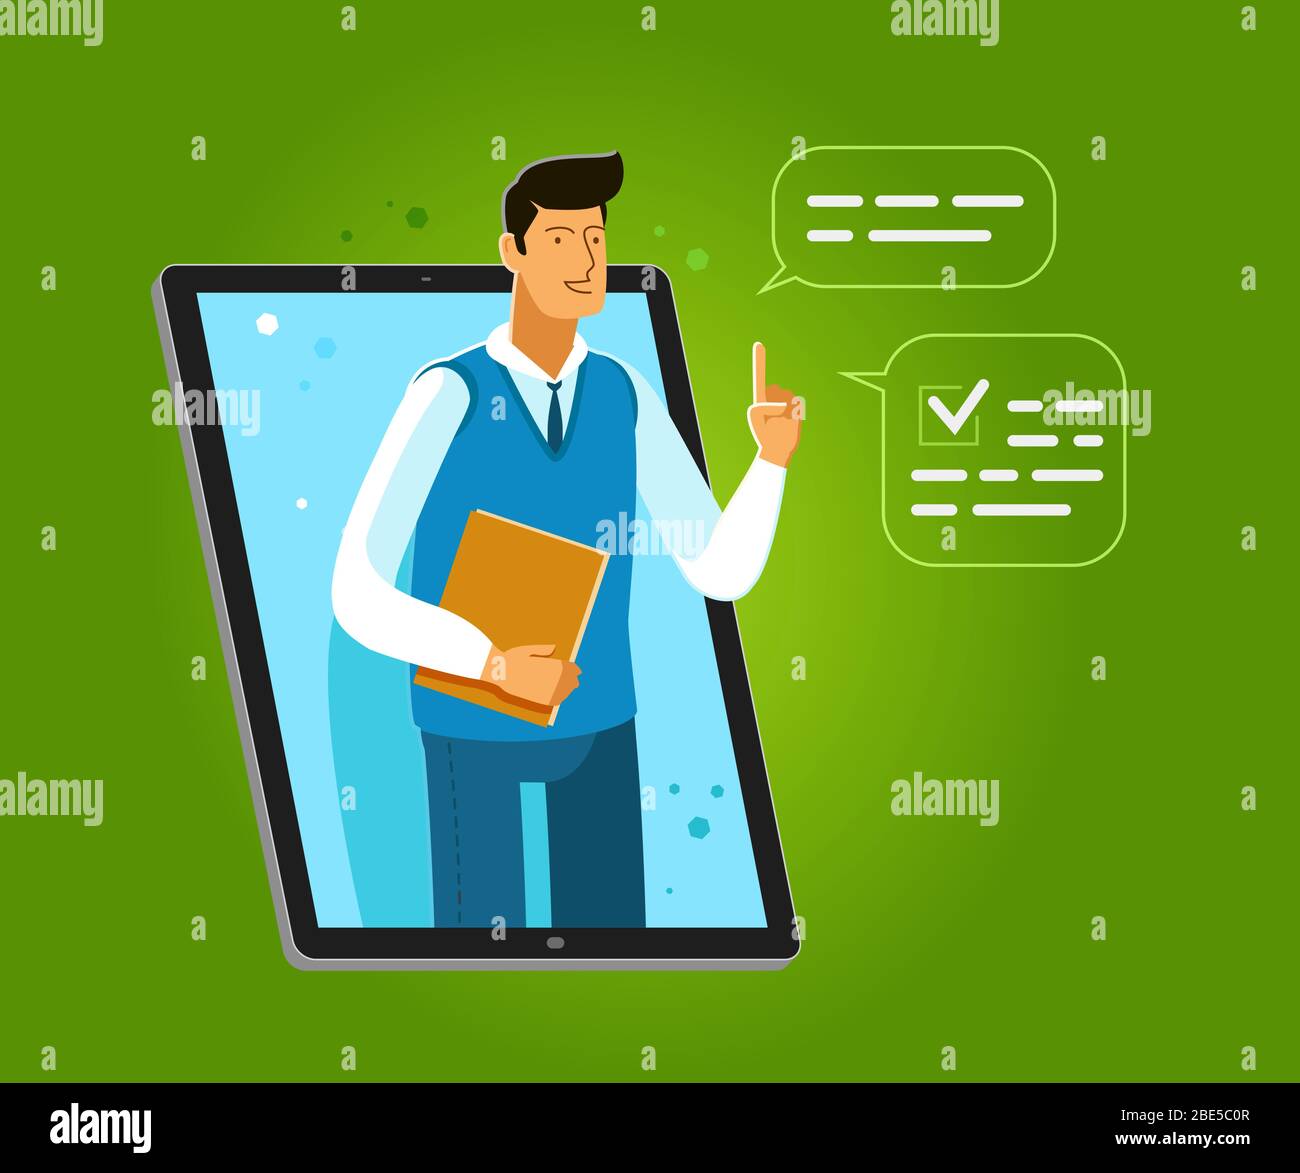 Learning provided through an application on laptop. Business, advisory service vector illustration Stock Vector